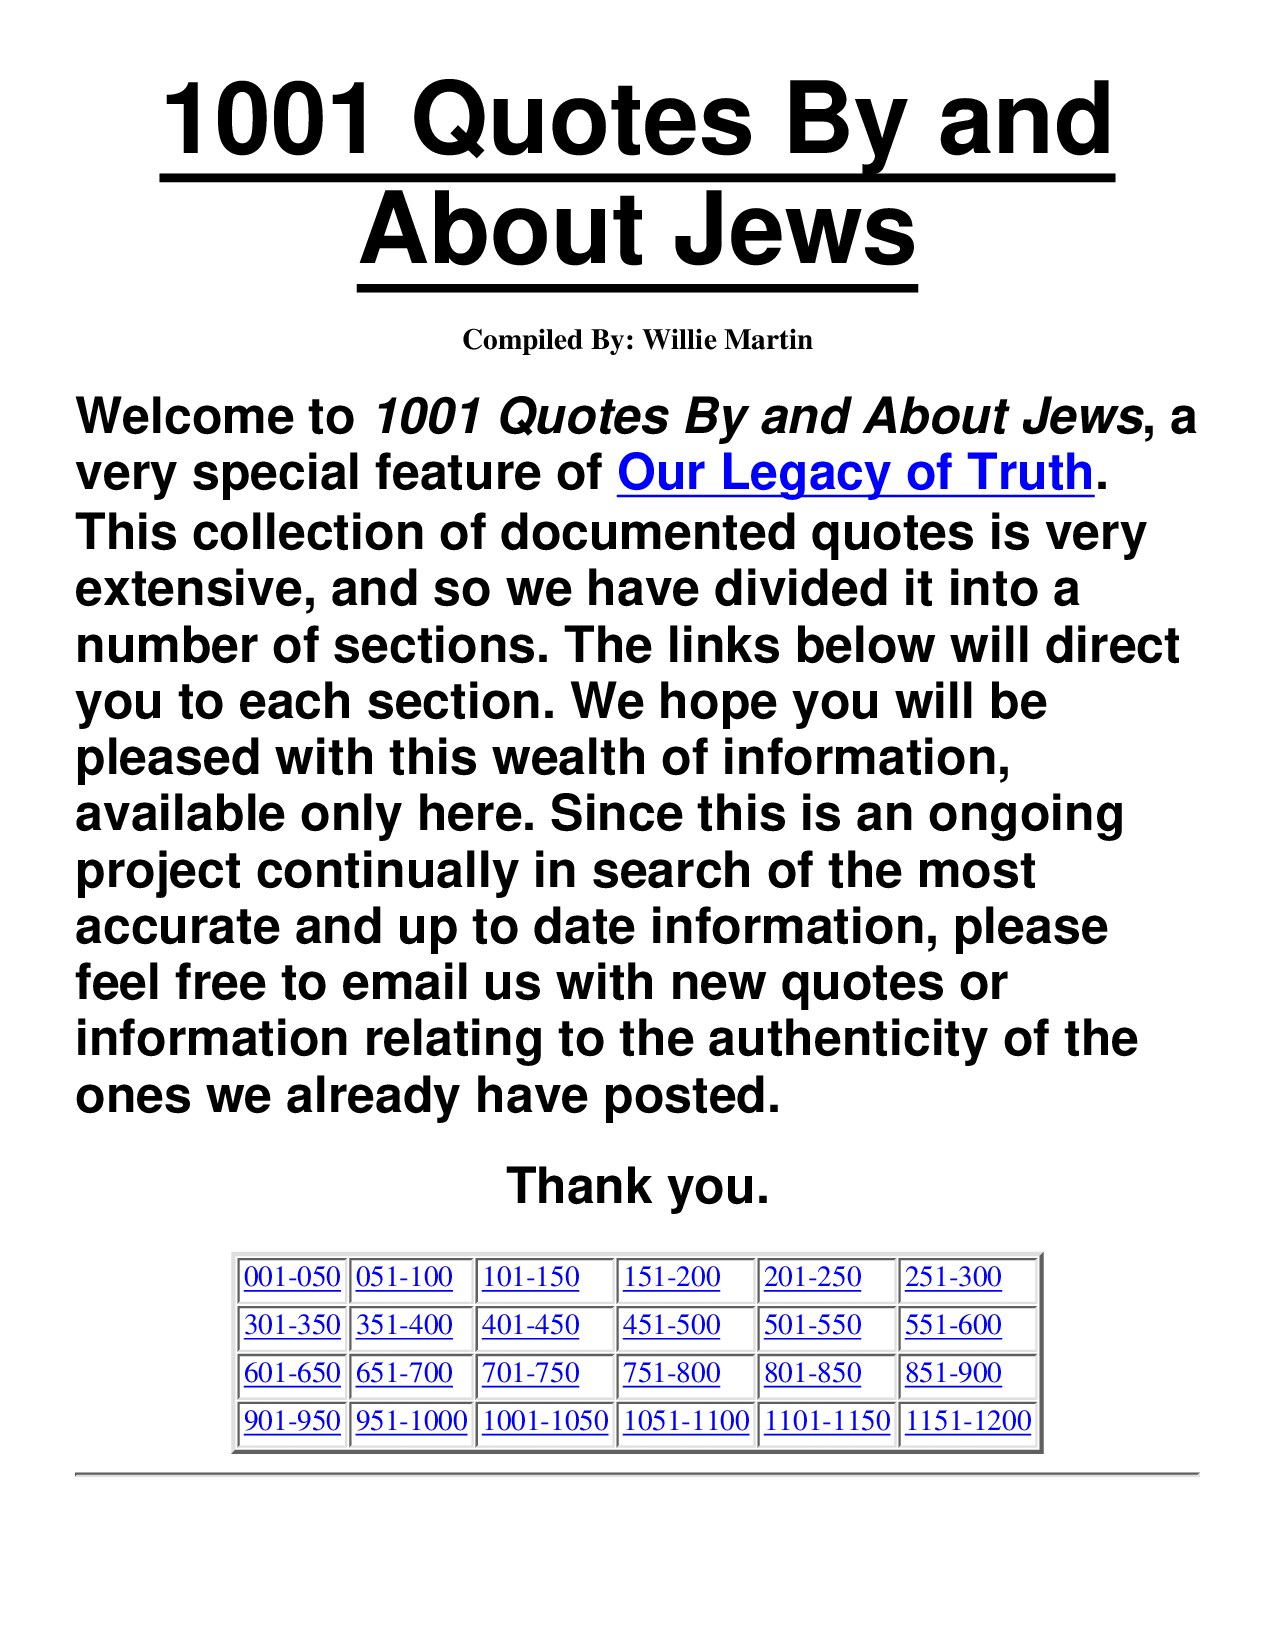 1001 Quotes By and About Jews